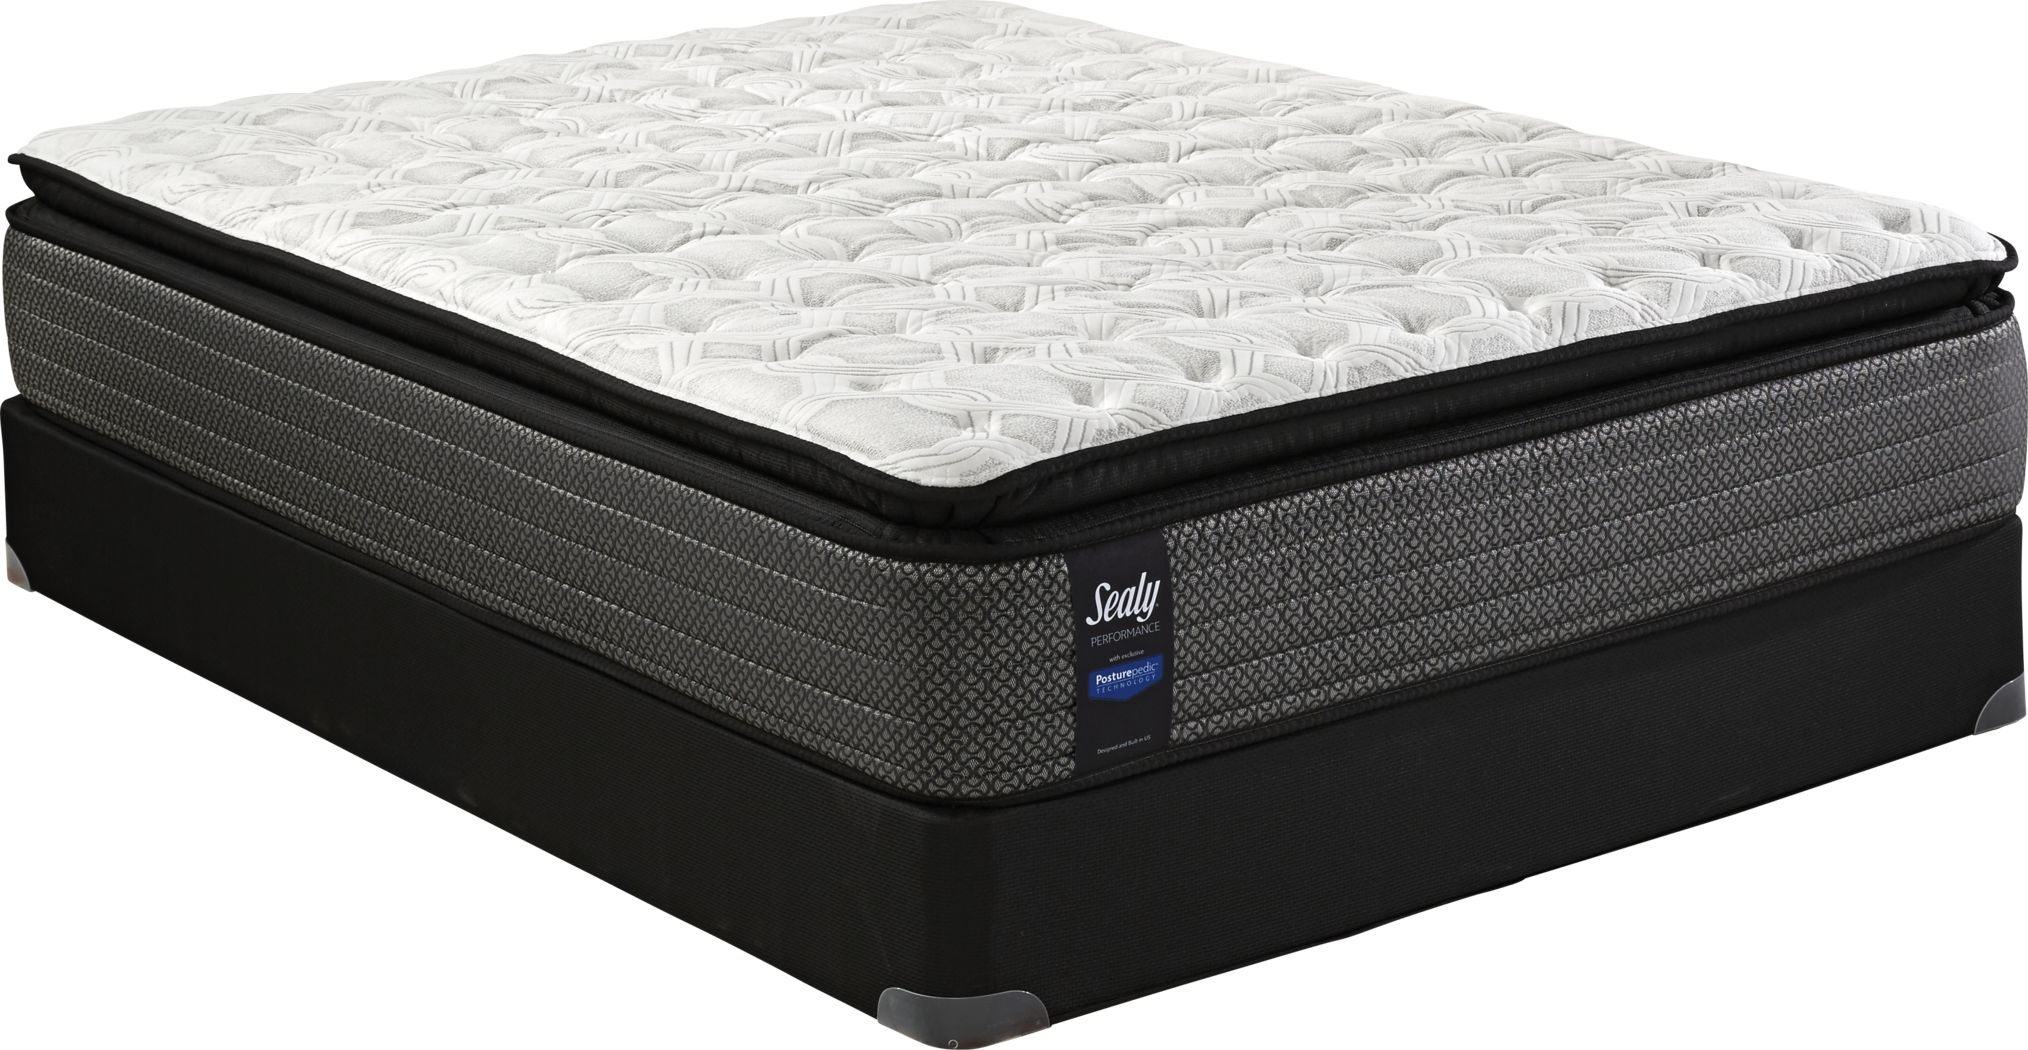 sealy notion firm queen mattress and boxspring set